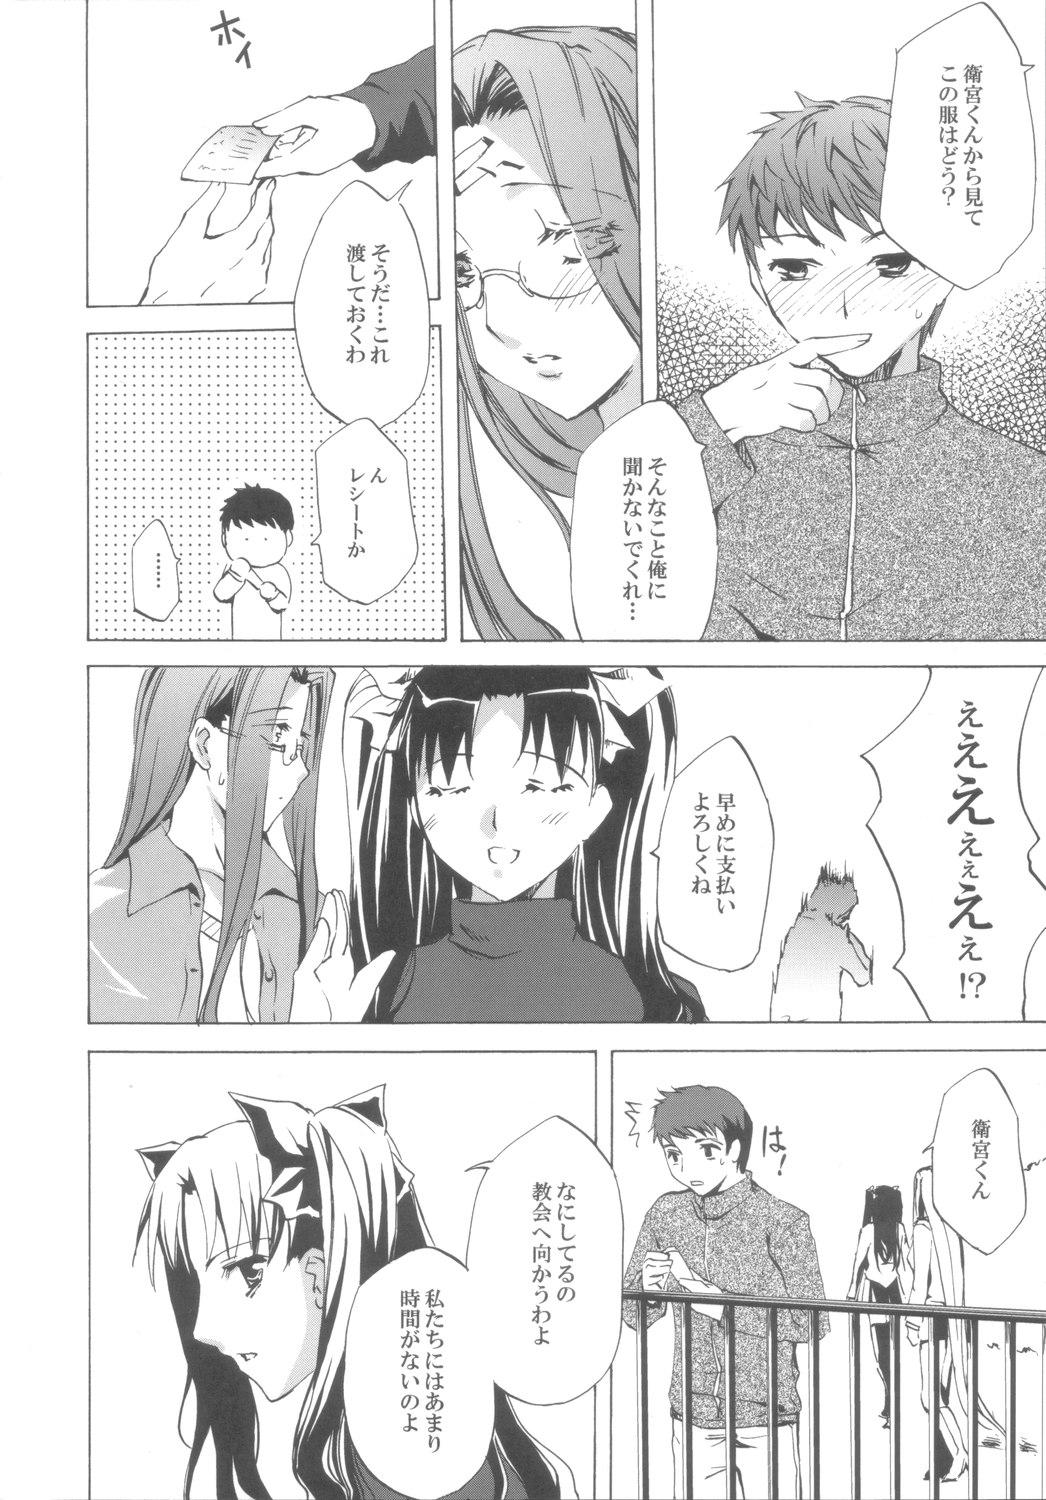 Bear Face III stay memory so truth - Fate stay night Periscope - Page 9